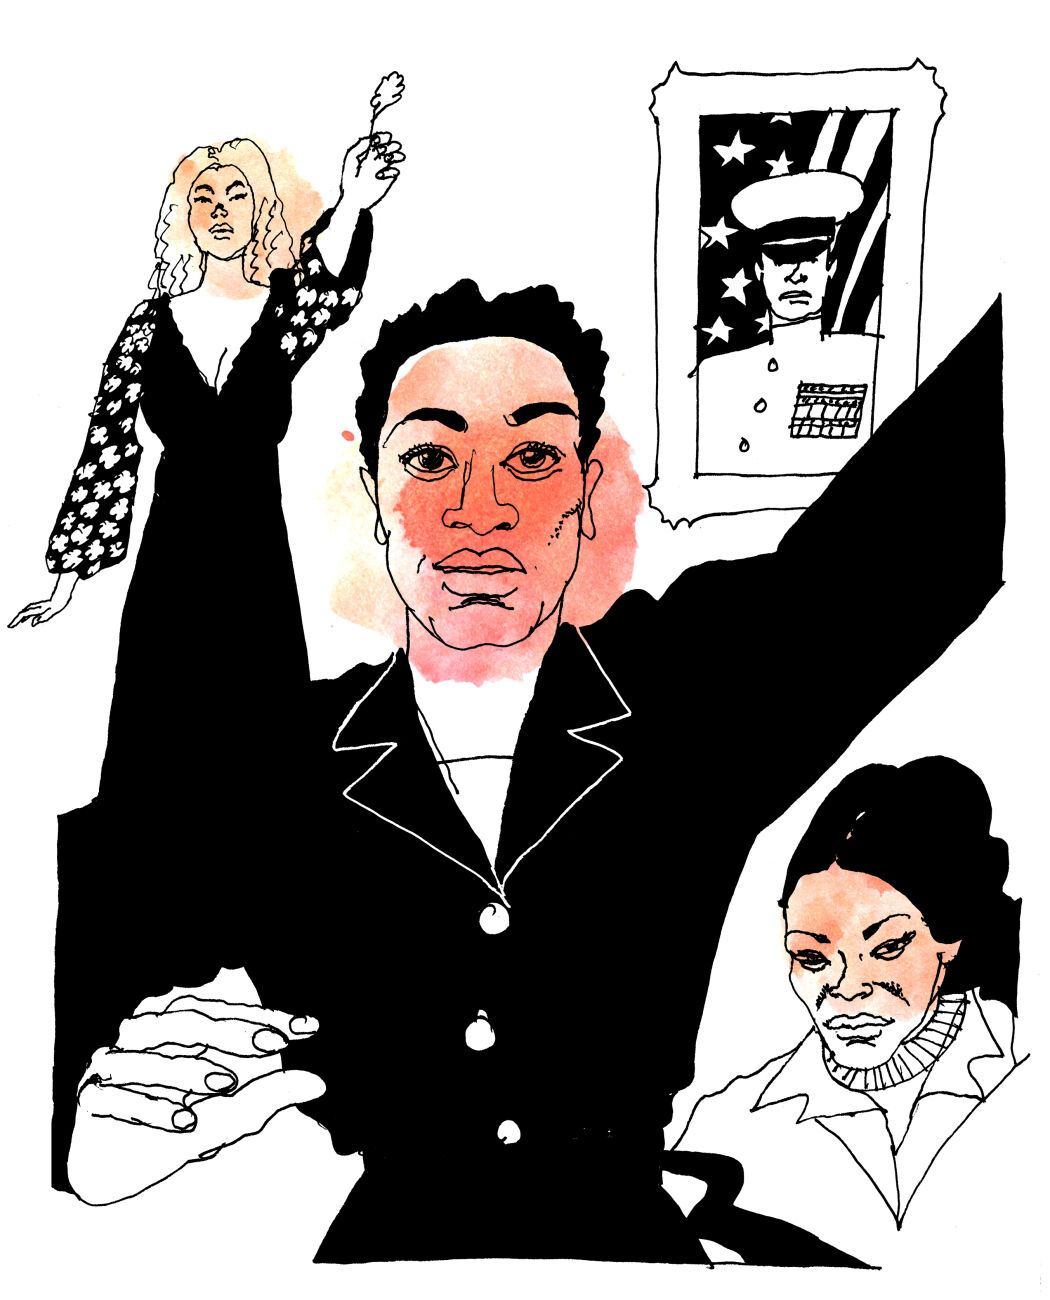 Illustrated portrait for The New Yorker by Dennis Eriksson